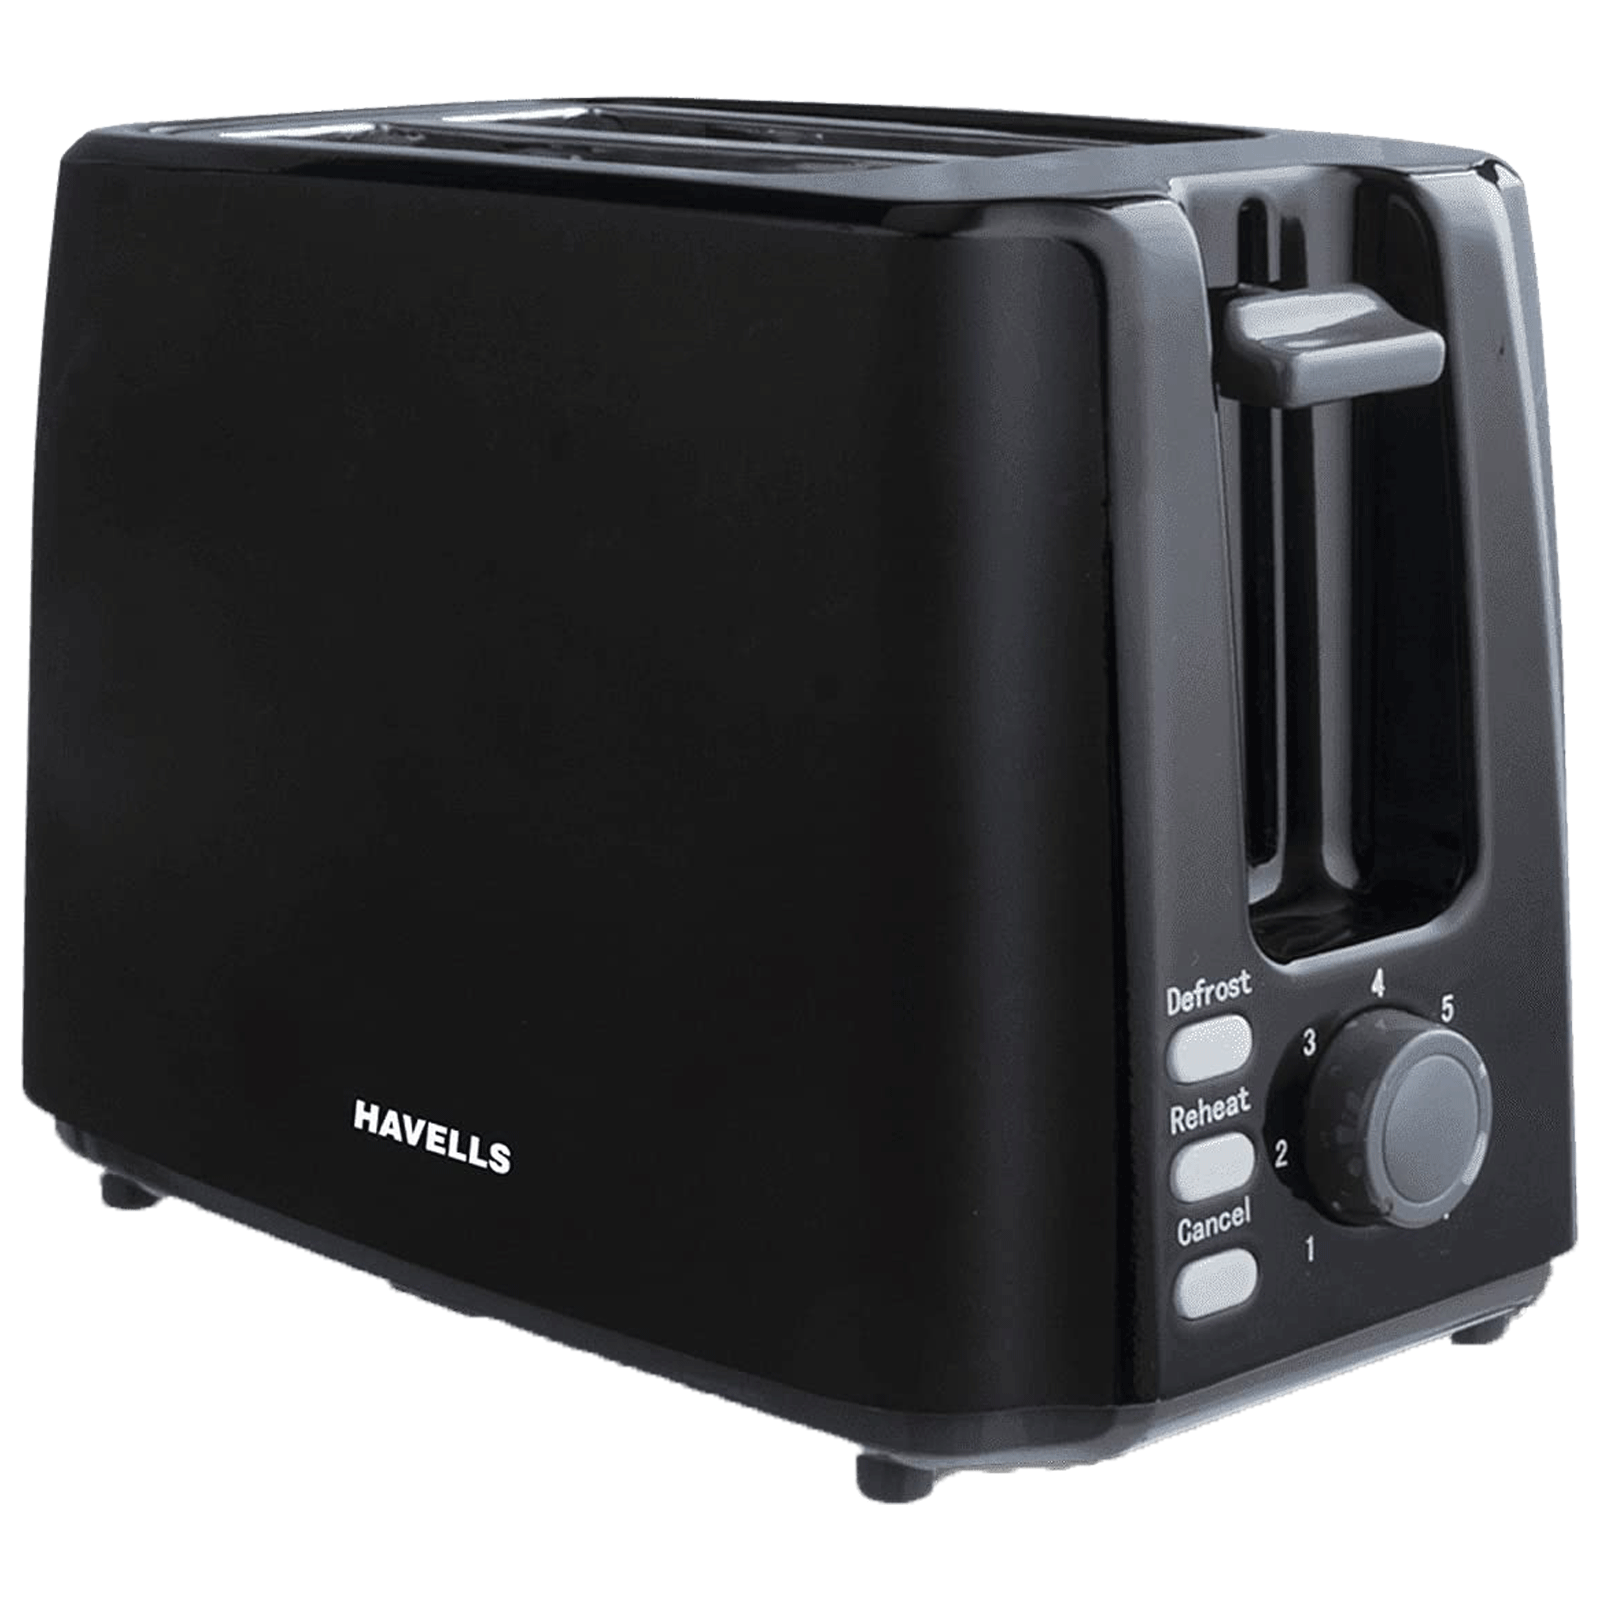 Havells Crisp Plus 750 Watts 2 Slice Automatic Pop-up Toaster (7 Heat Setting With Electronic Variable Browning, GHCPTCJK075, Black)_1